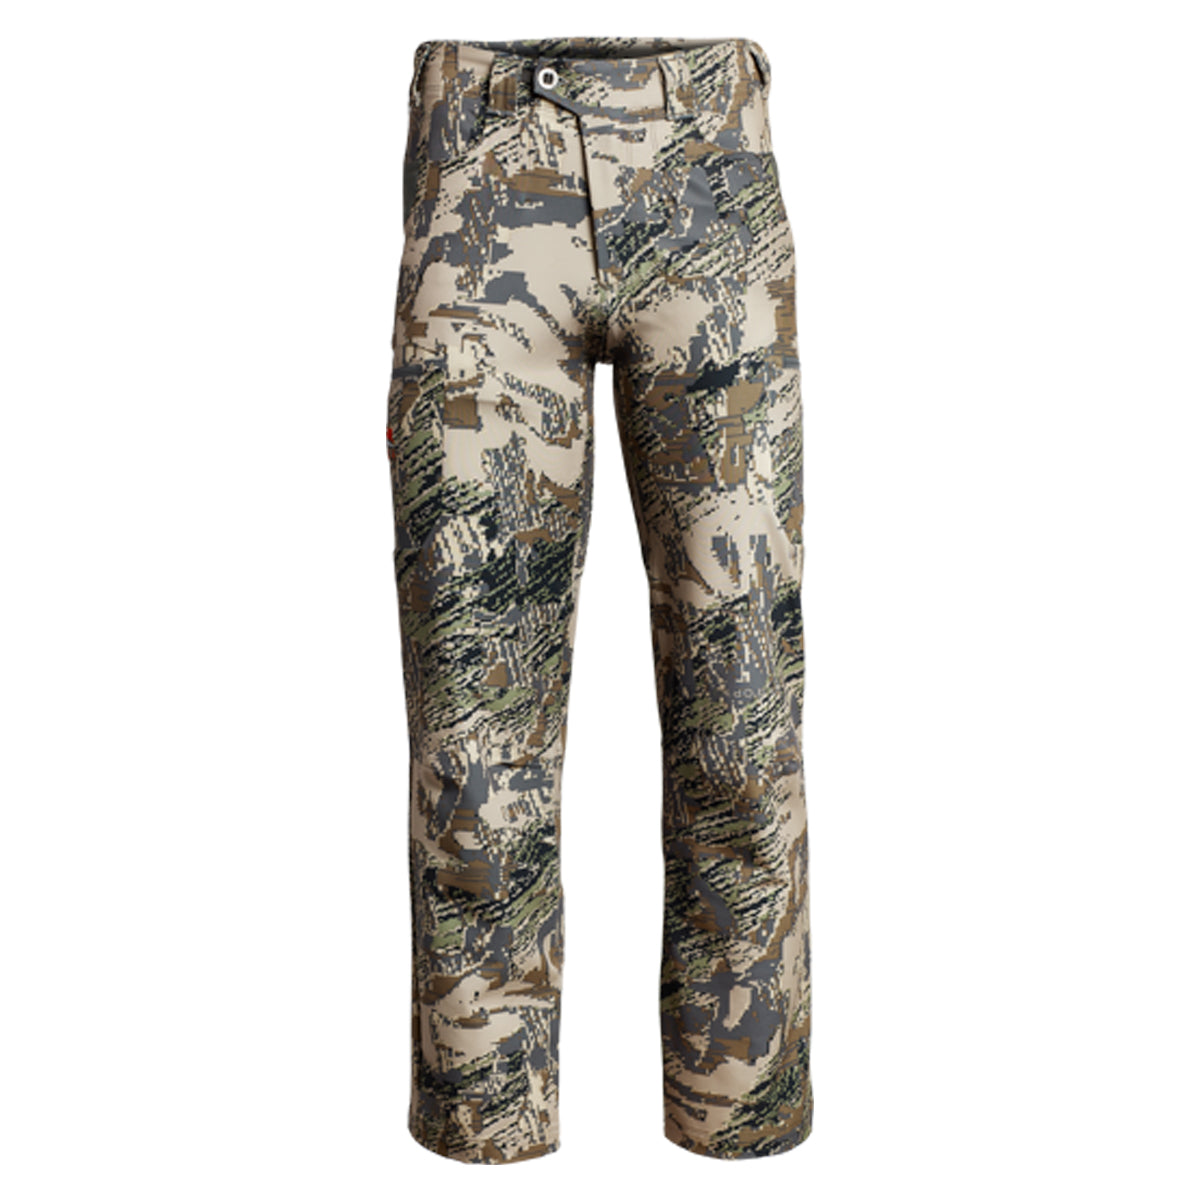 Sitka Traverse Pant in Optifade Open Country by GOHUNT | Sitka - GOHUNT Shop